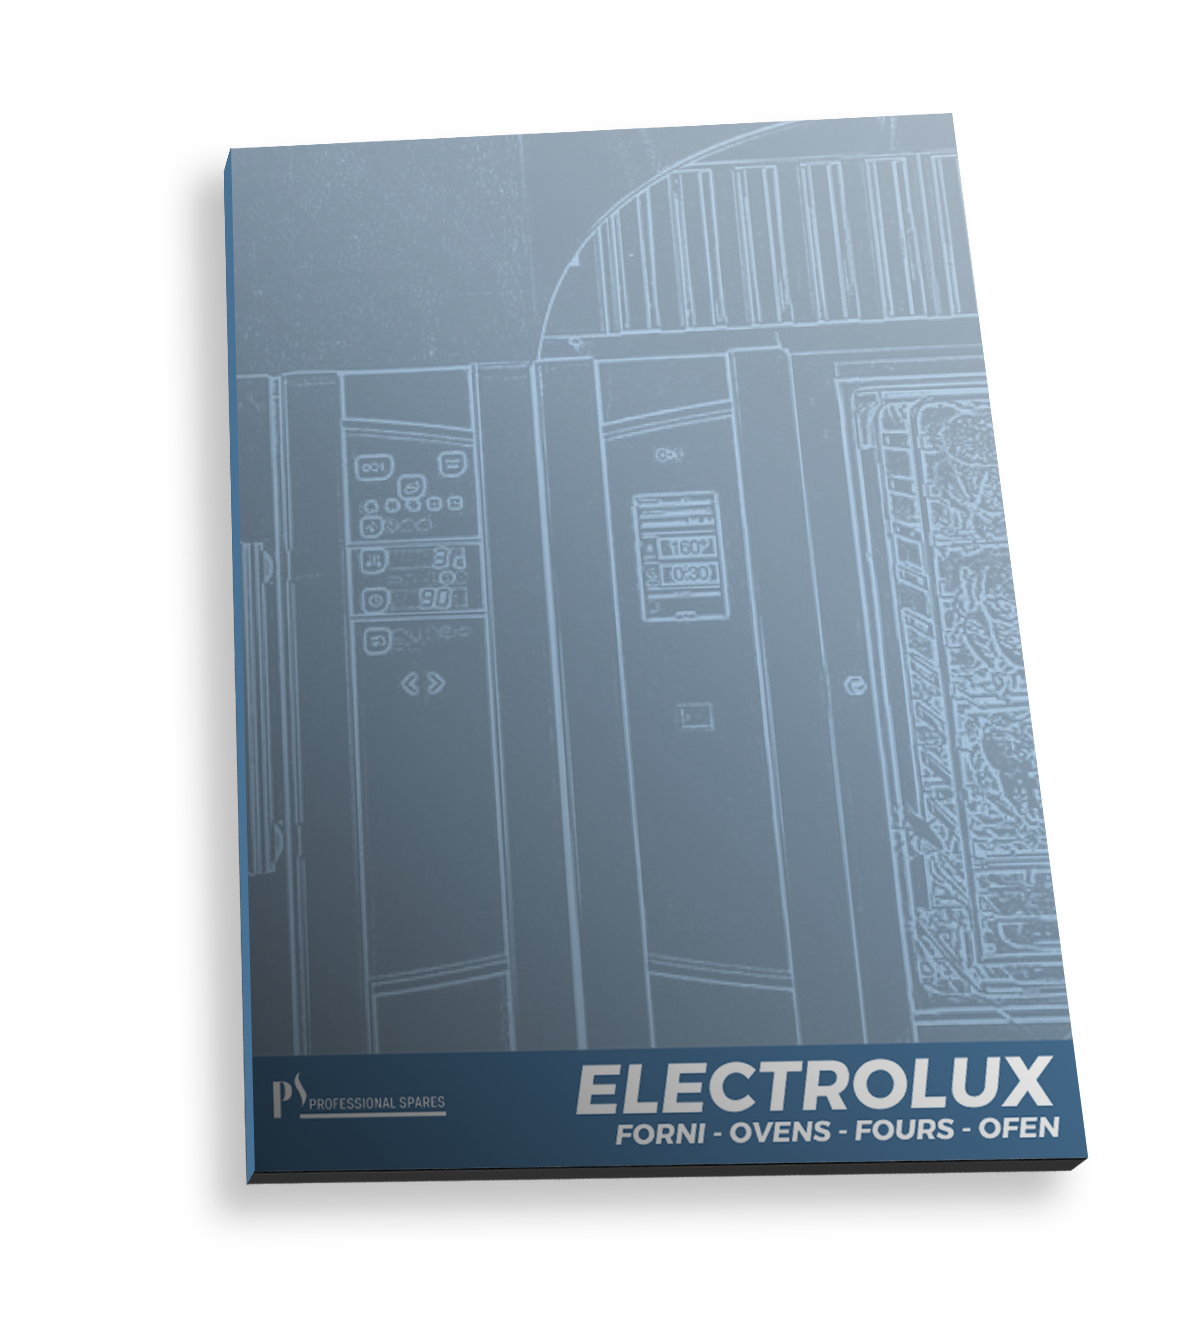 Frigidaire electrolux oven manual